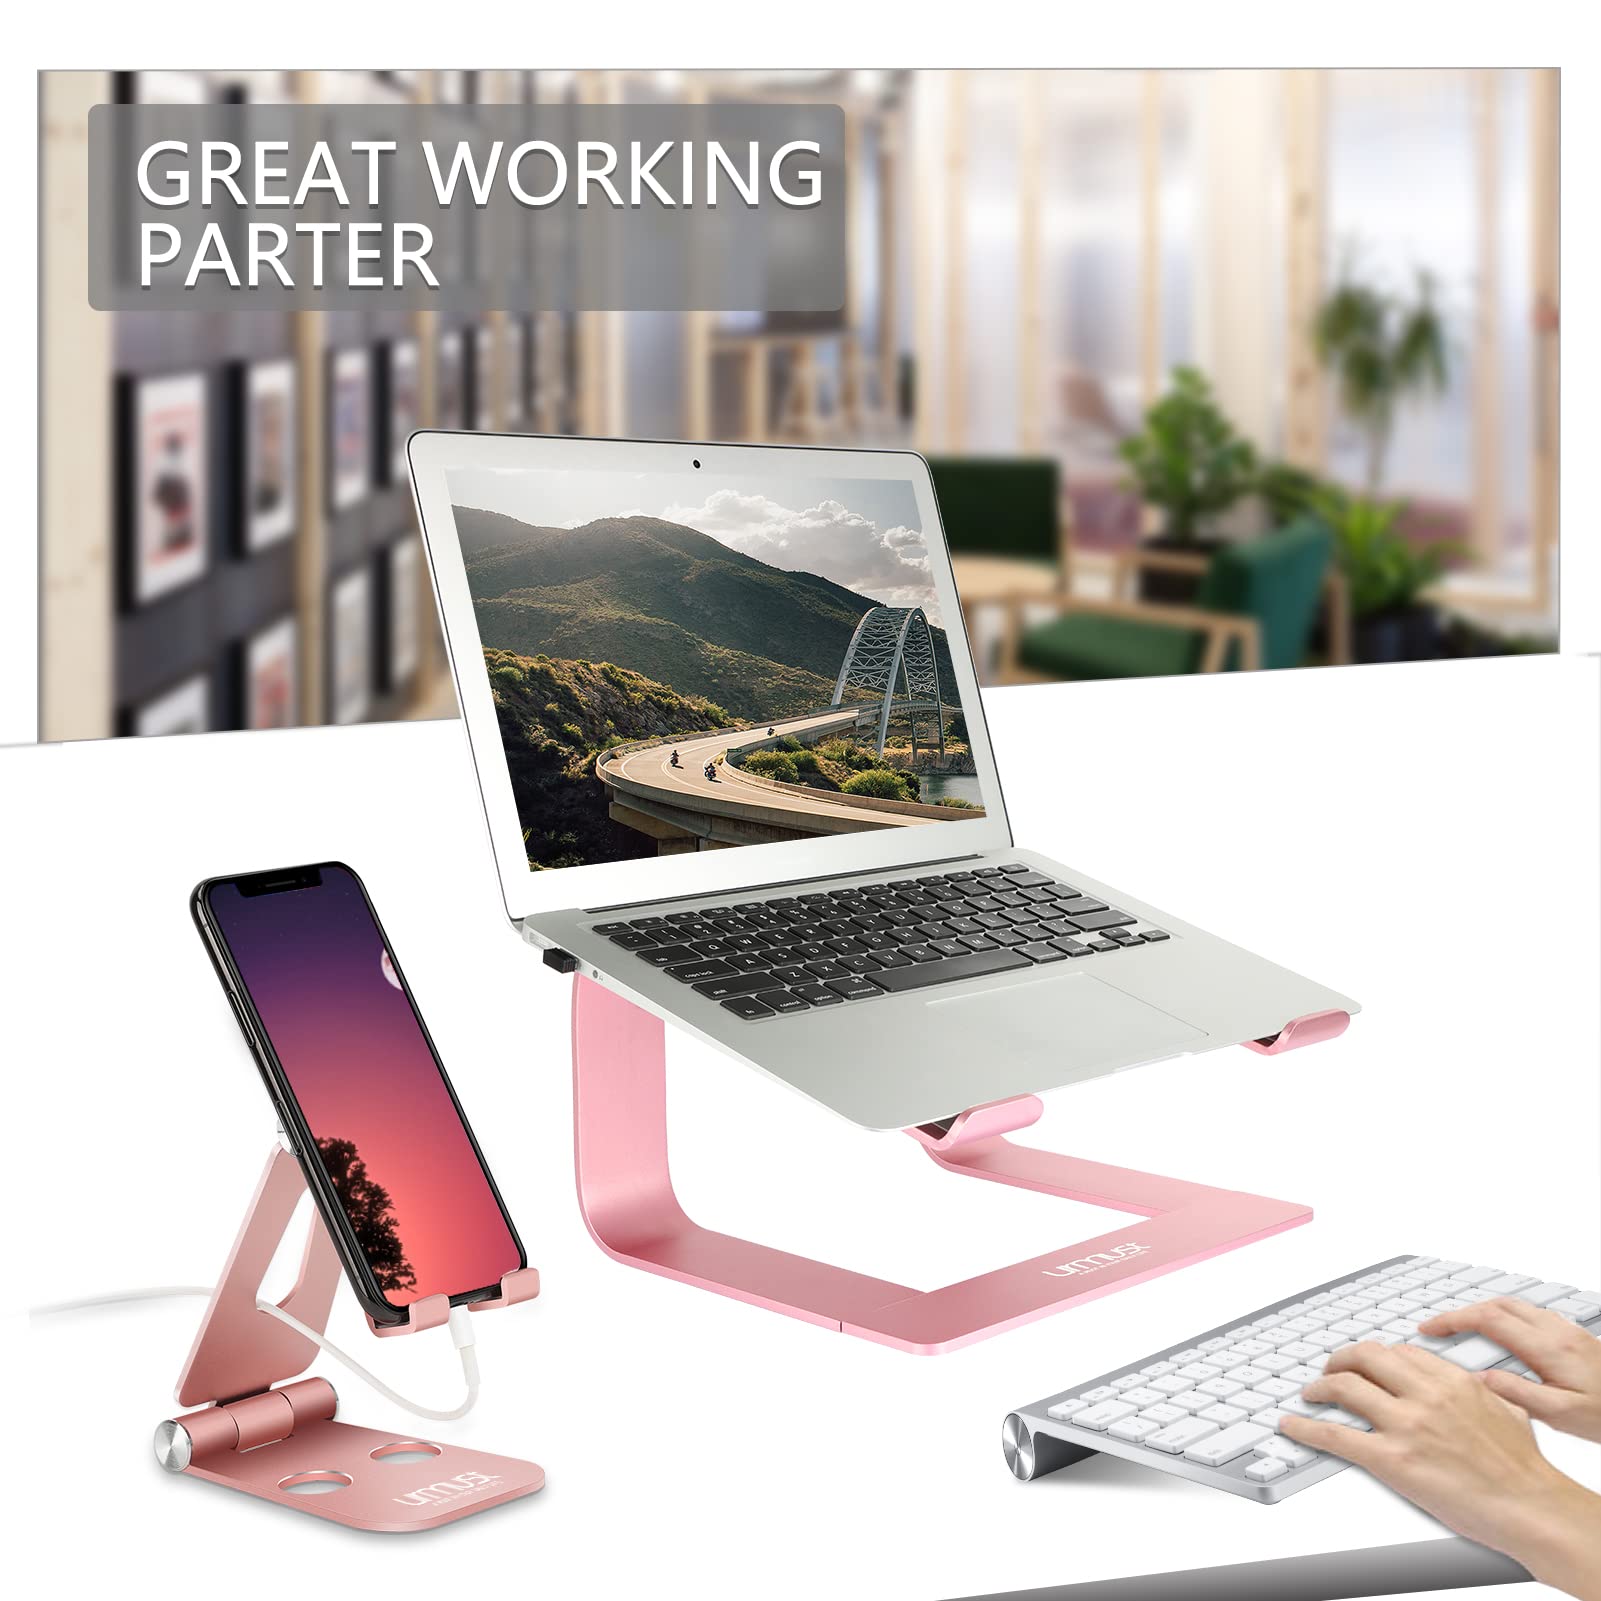 Urmust Laptop Stand for Desk Aluminum Computer Stand for Laptop Riser Holder Notebook Stand Compatible with MacBook Air Pro, Dell, HP, Lenovo Samsung, Alienware All Laptops 11-15.6